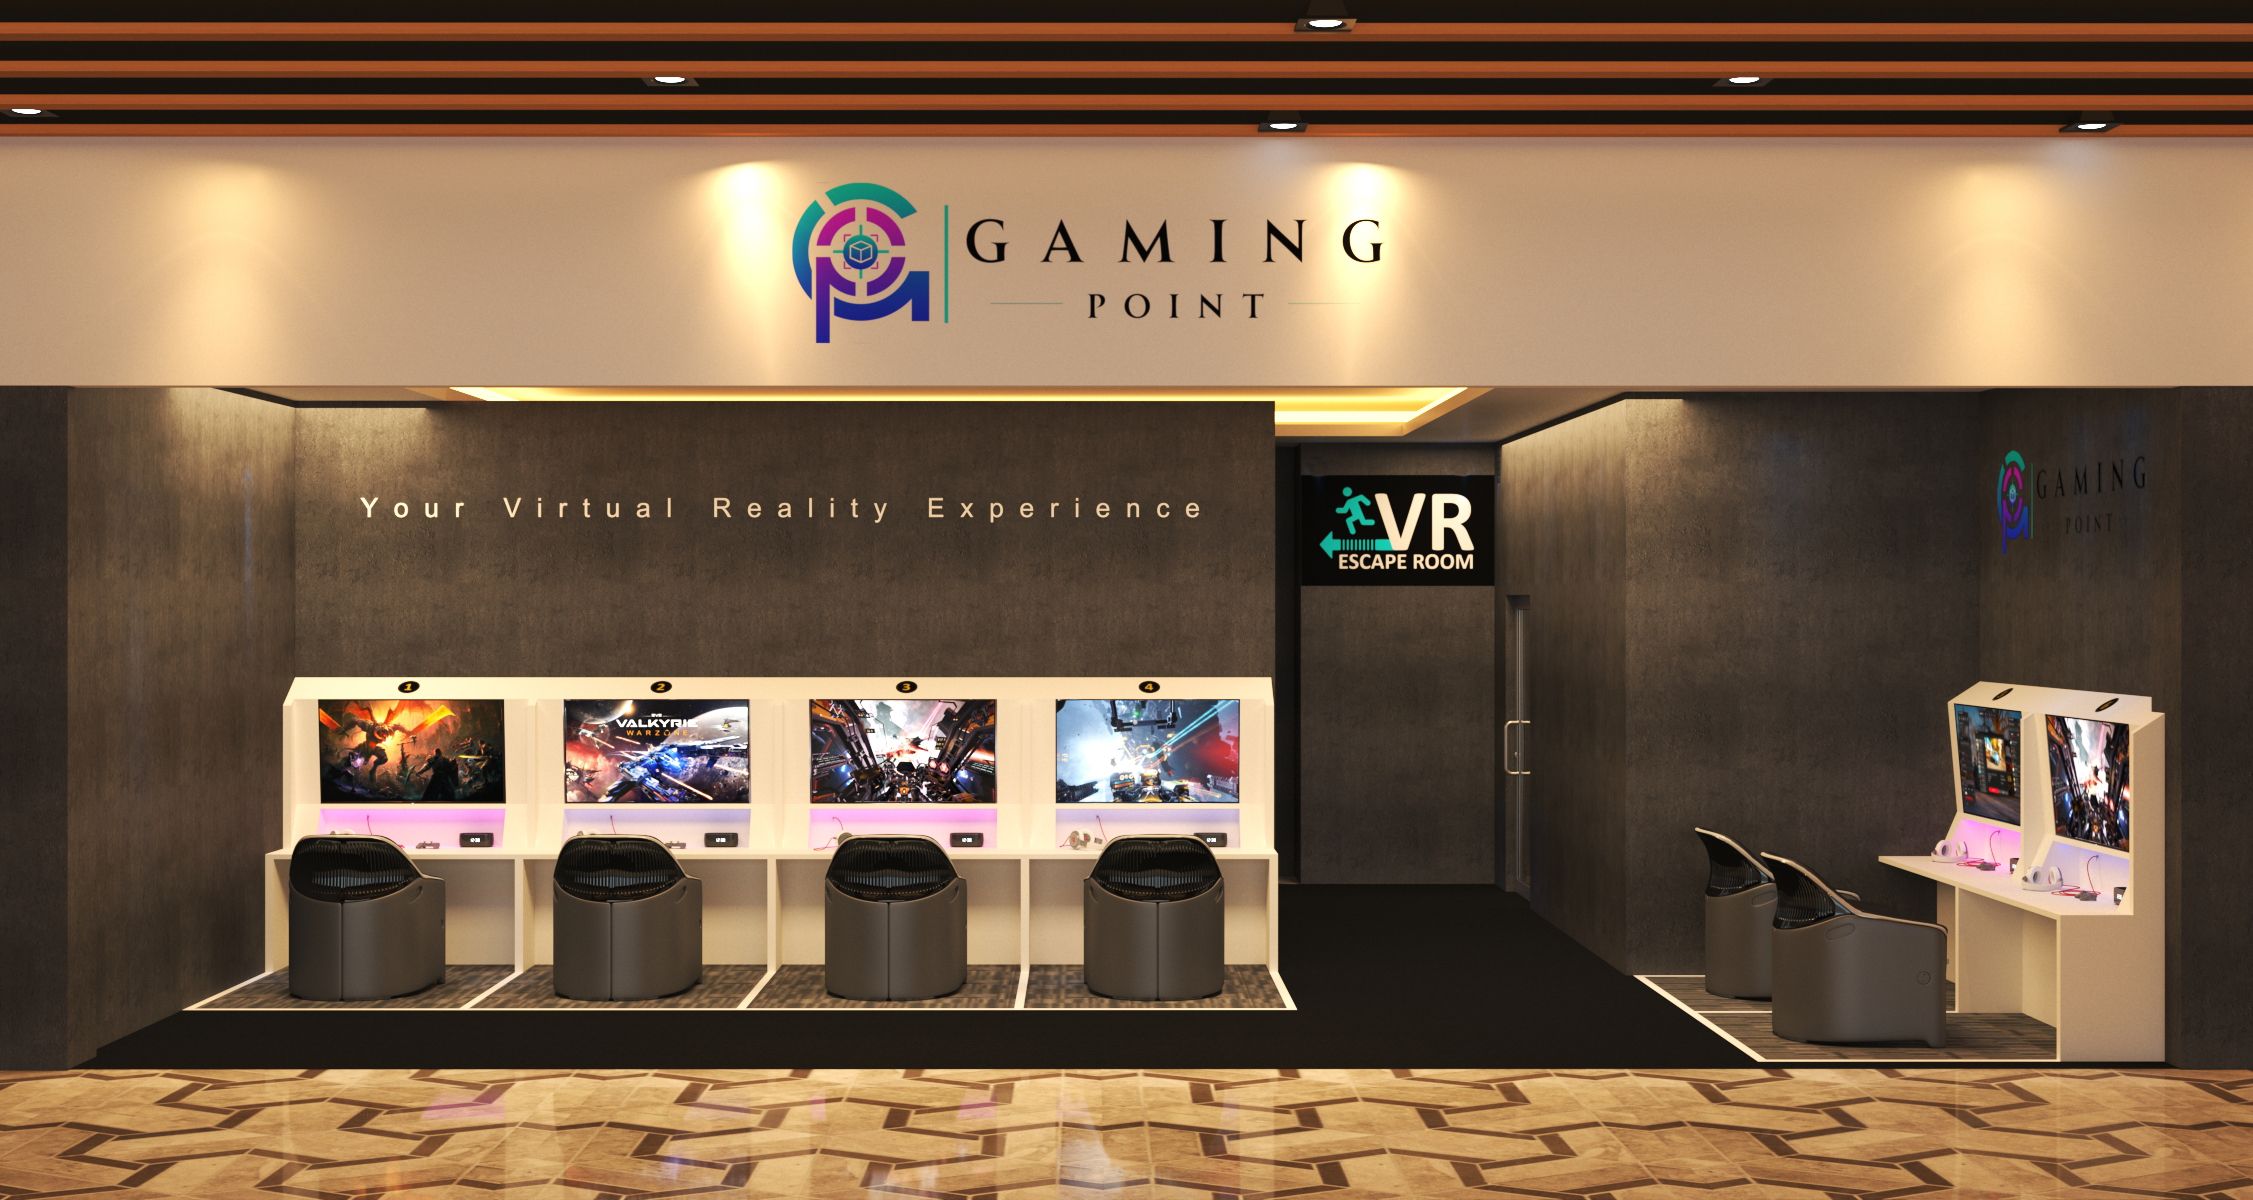 Perth Airport Gaming Point